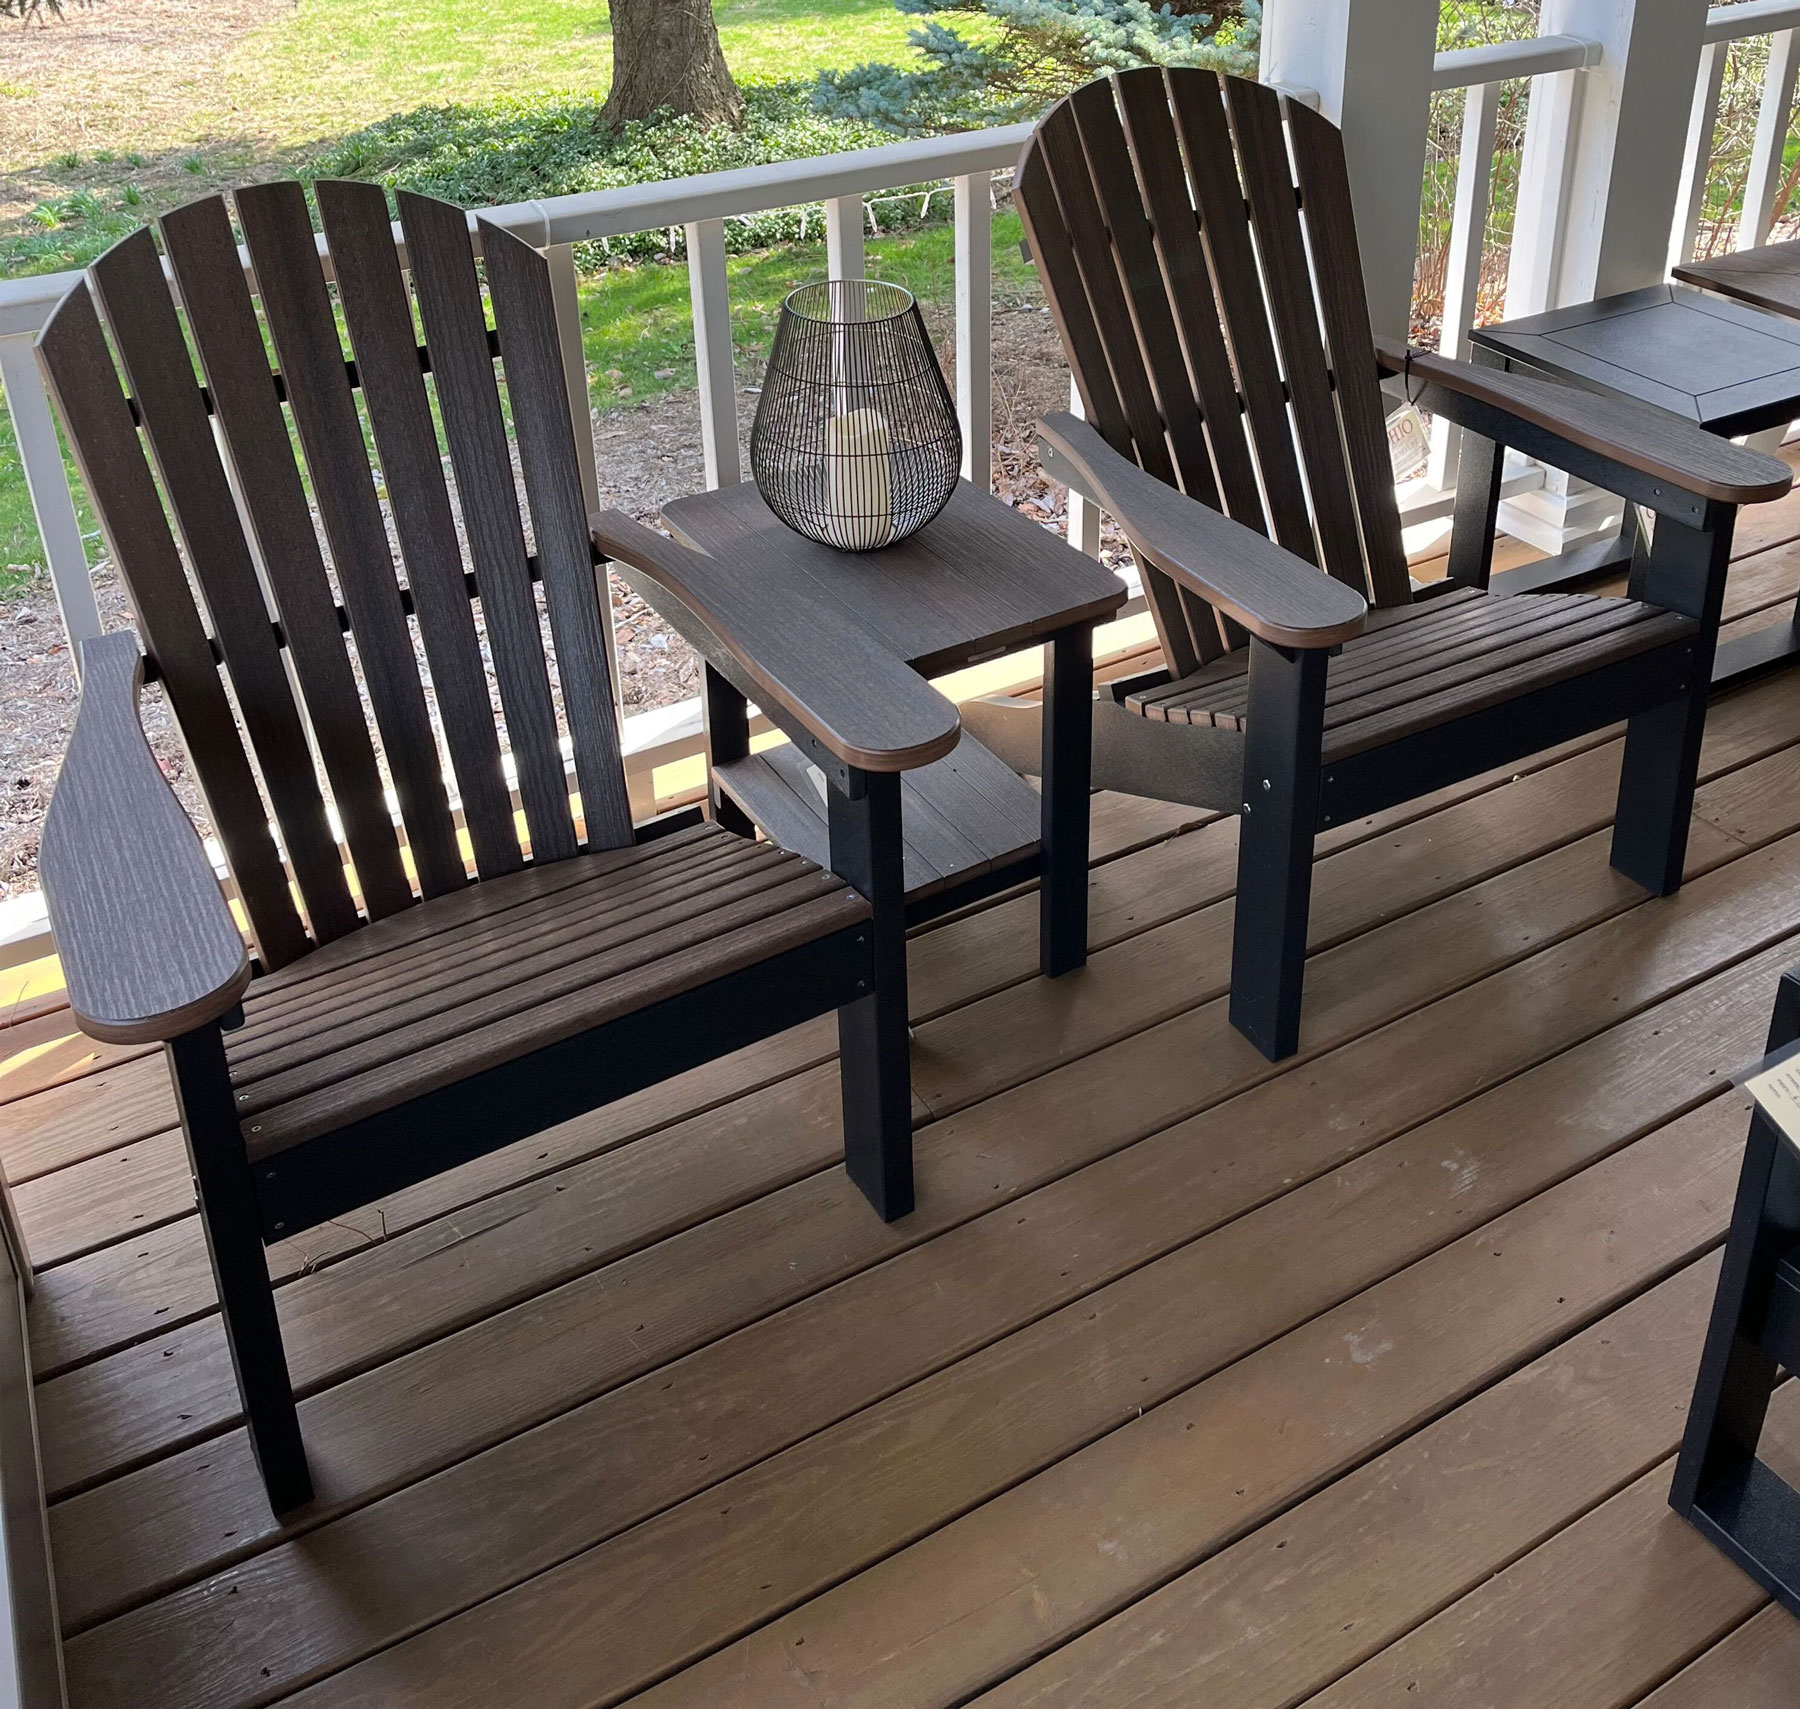 (2) Comfo-Back Adirondacks and (1) Rectangle End Table in Brazilian Walnut on Black